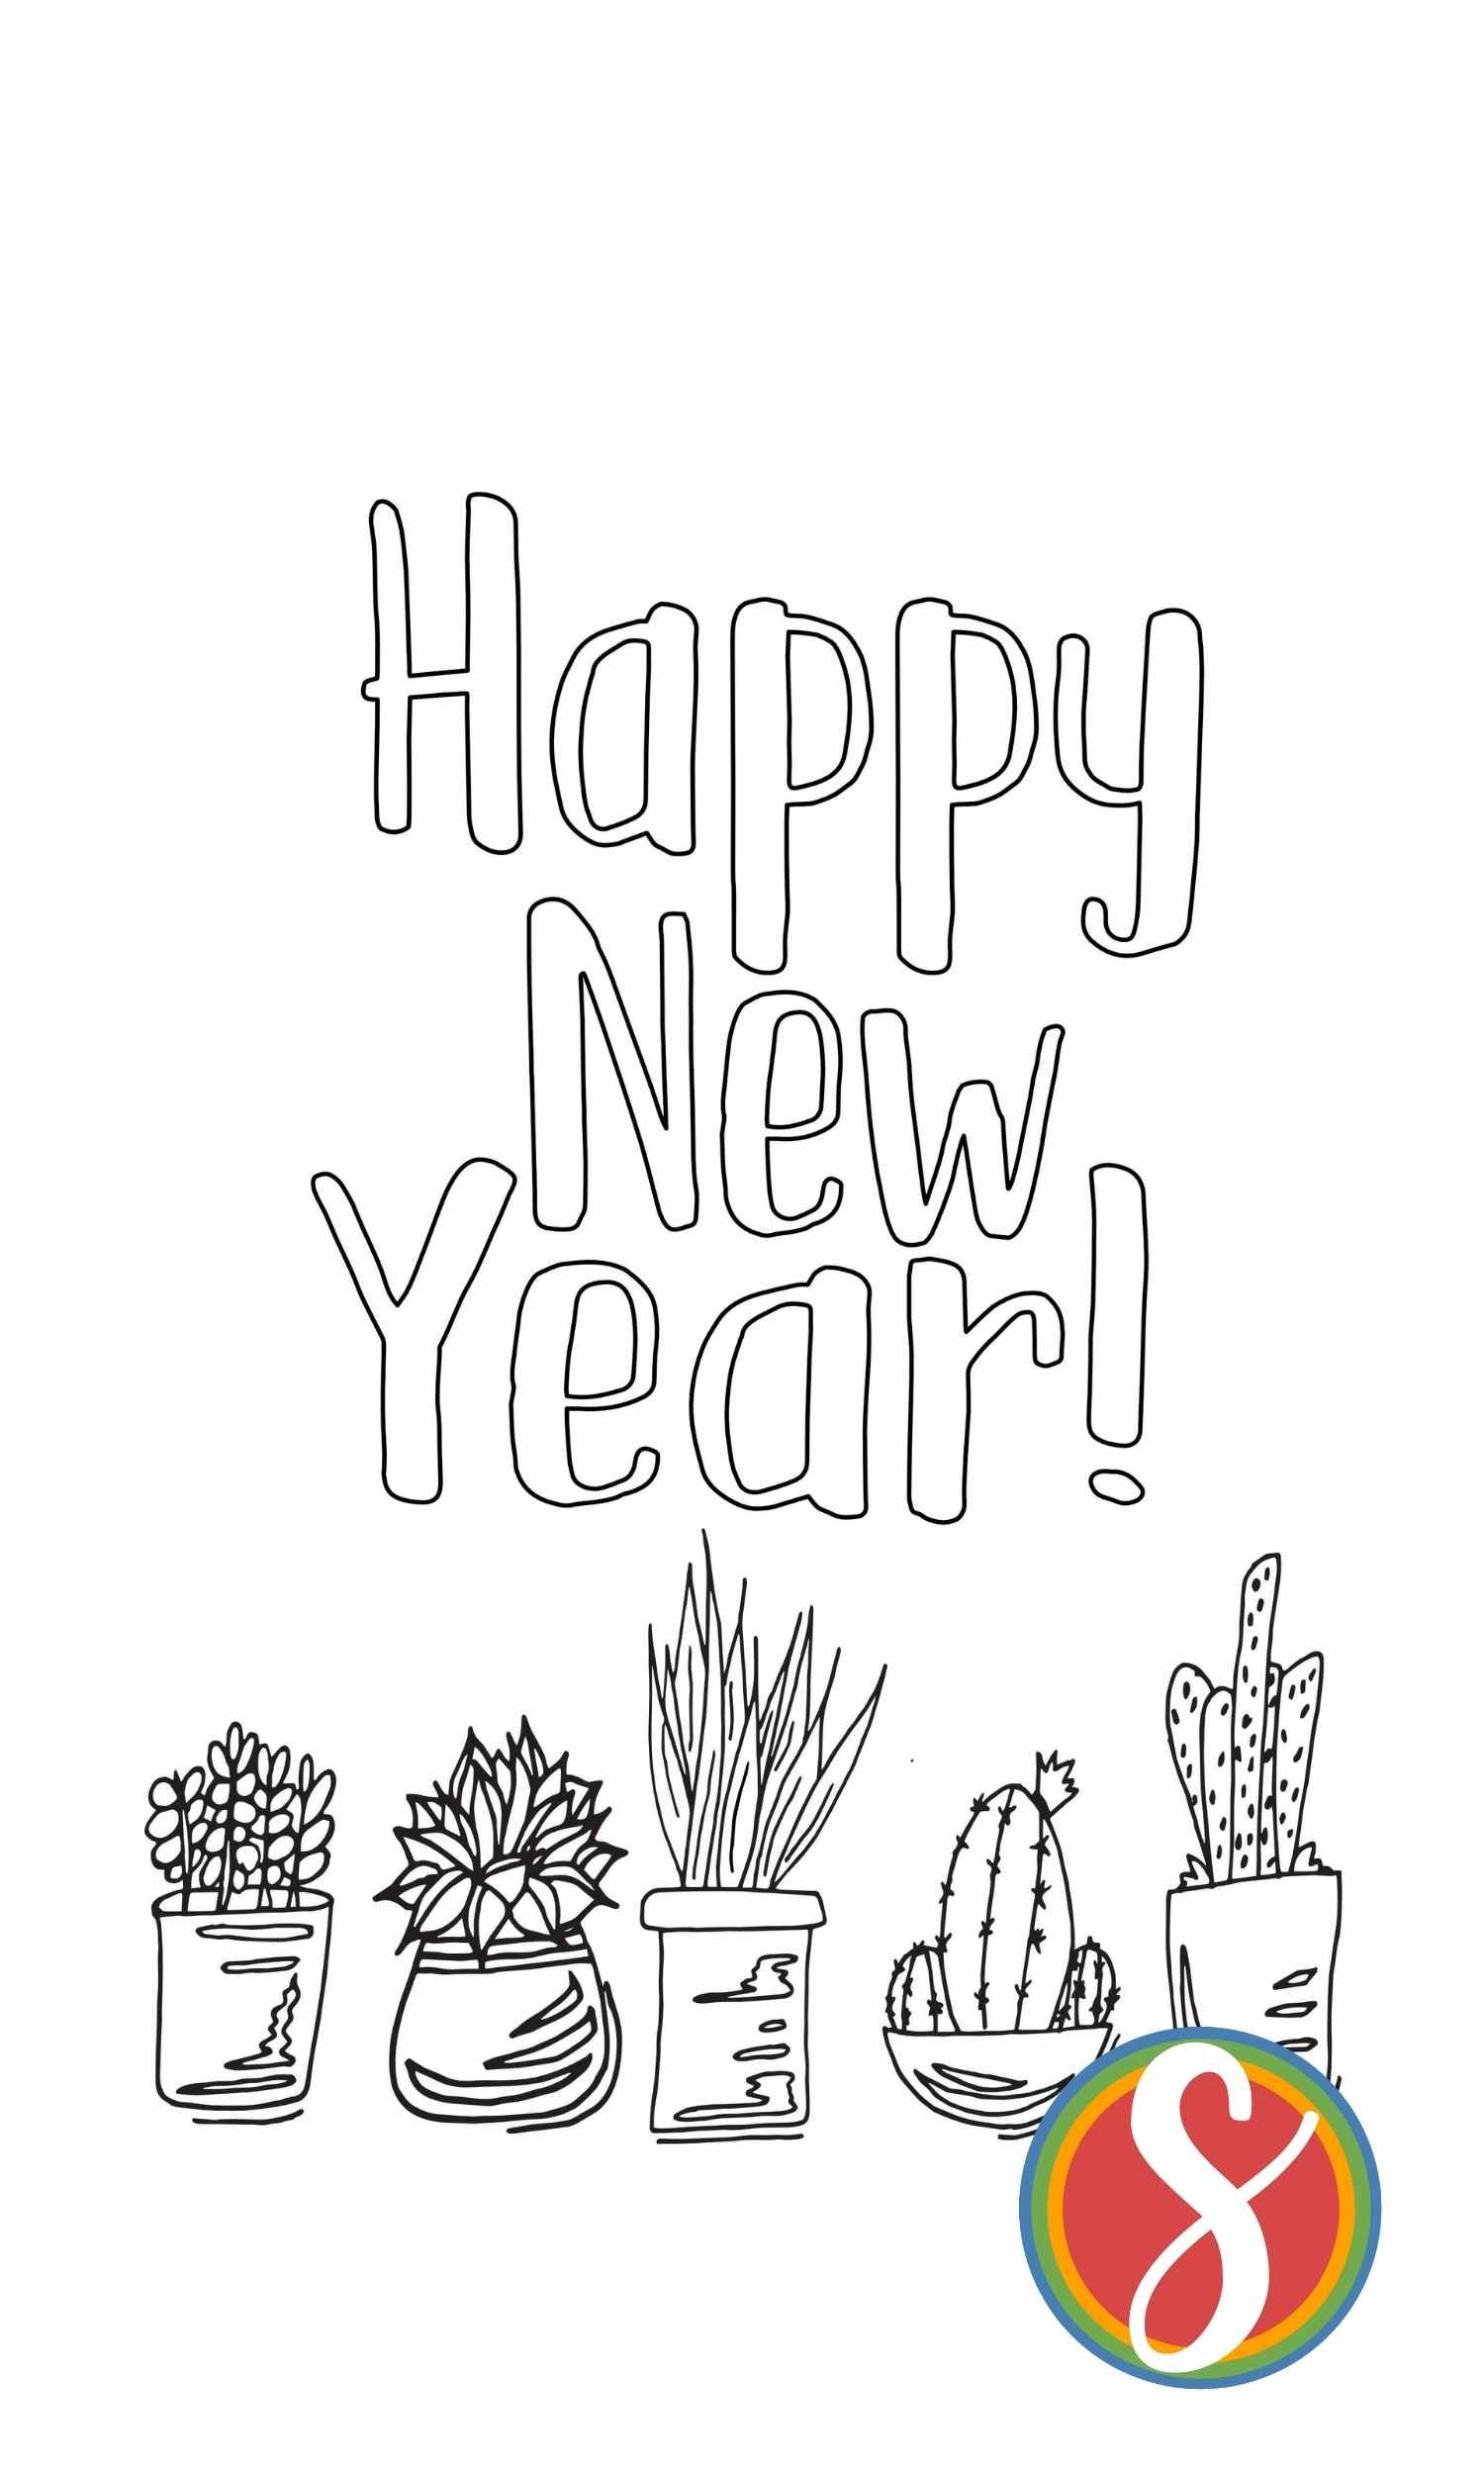 line of colorable succulents underneath colorable text "Happy New Year!"